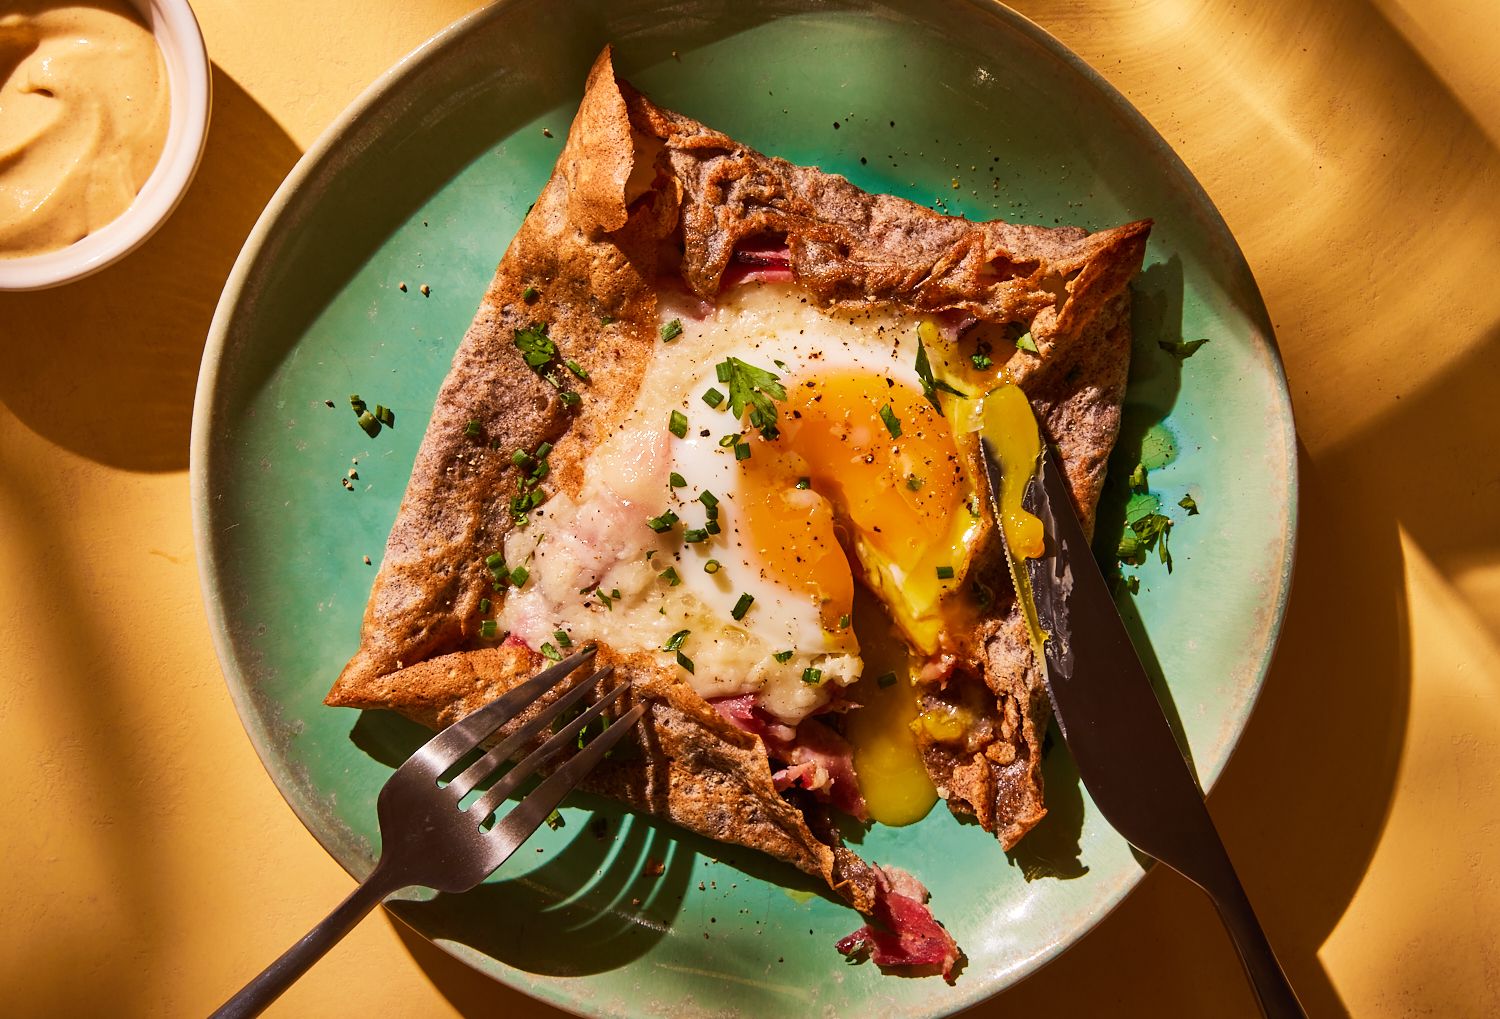 https://hips.hearstapps.com/hmg-prod/images/buckwheat-galettes-with-ham-and-egg1-1661193808.jpg